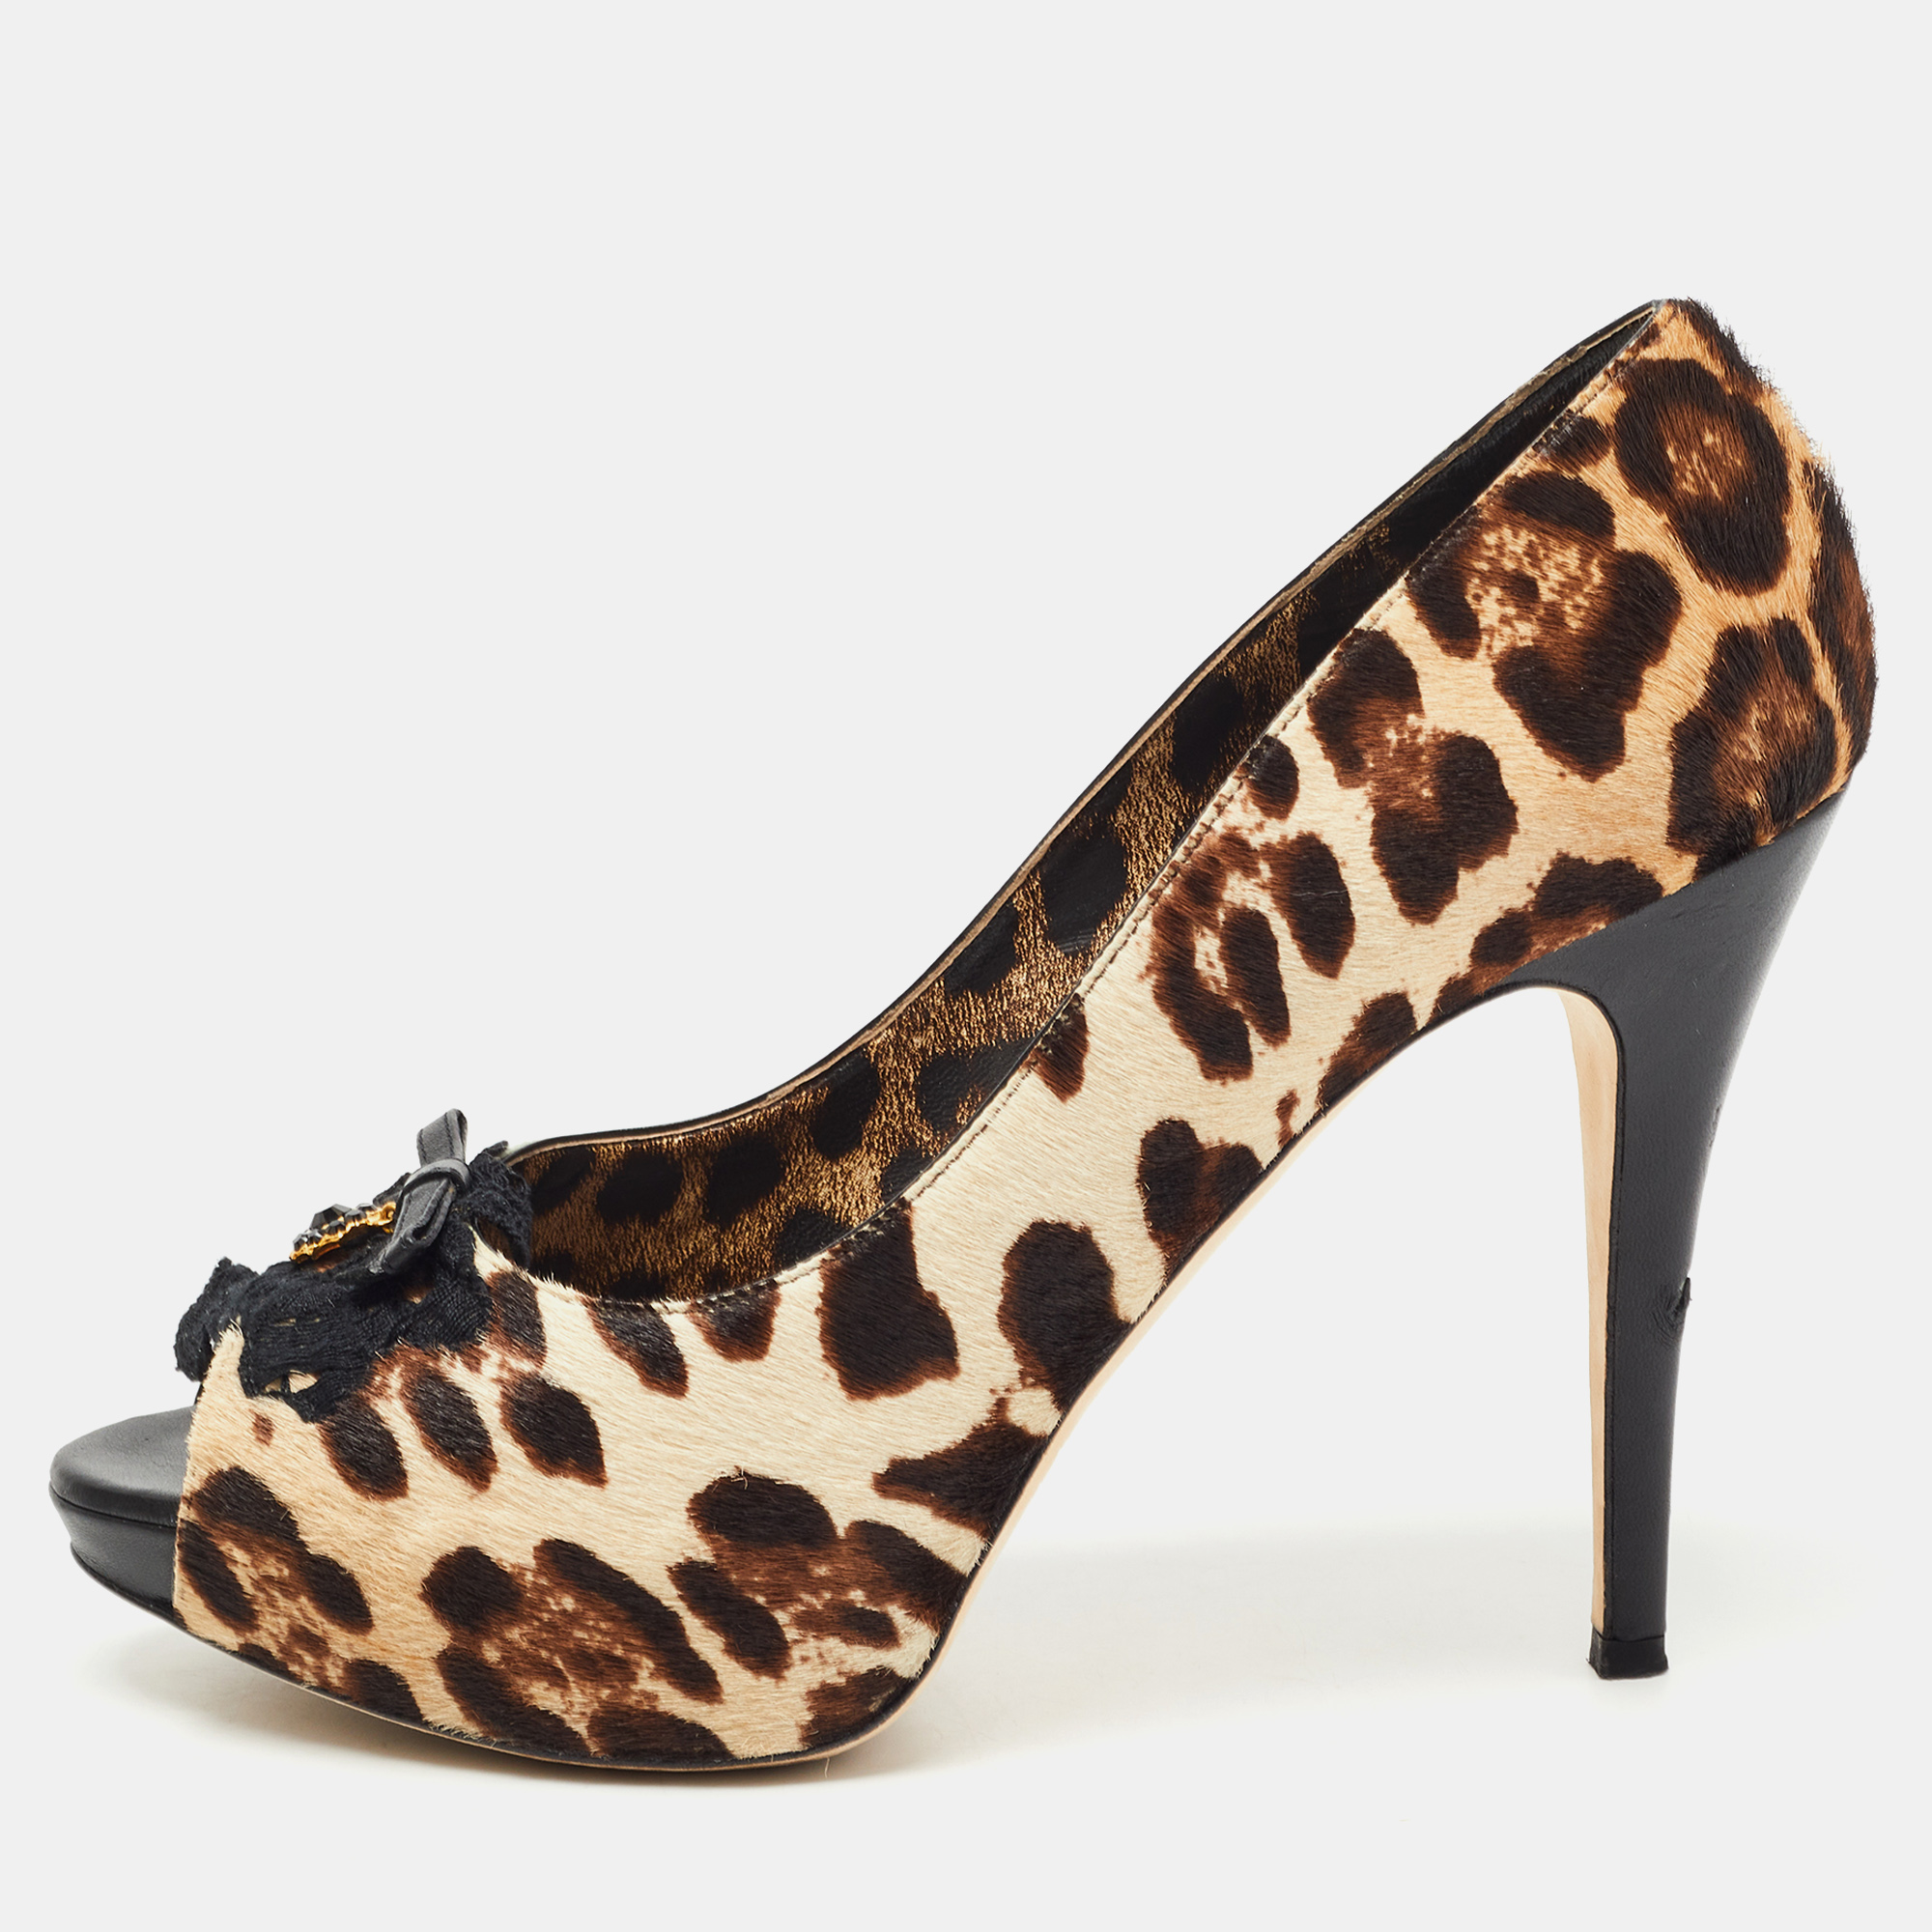 These leopard print Dolce and Gabbana shoes are meant to last you season after season. They have a comfortable fit and high quality finish.